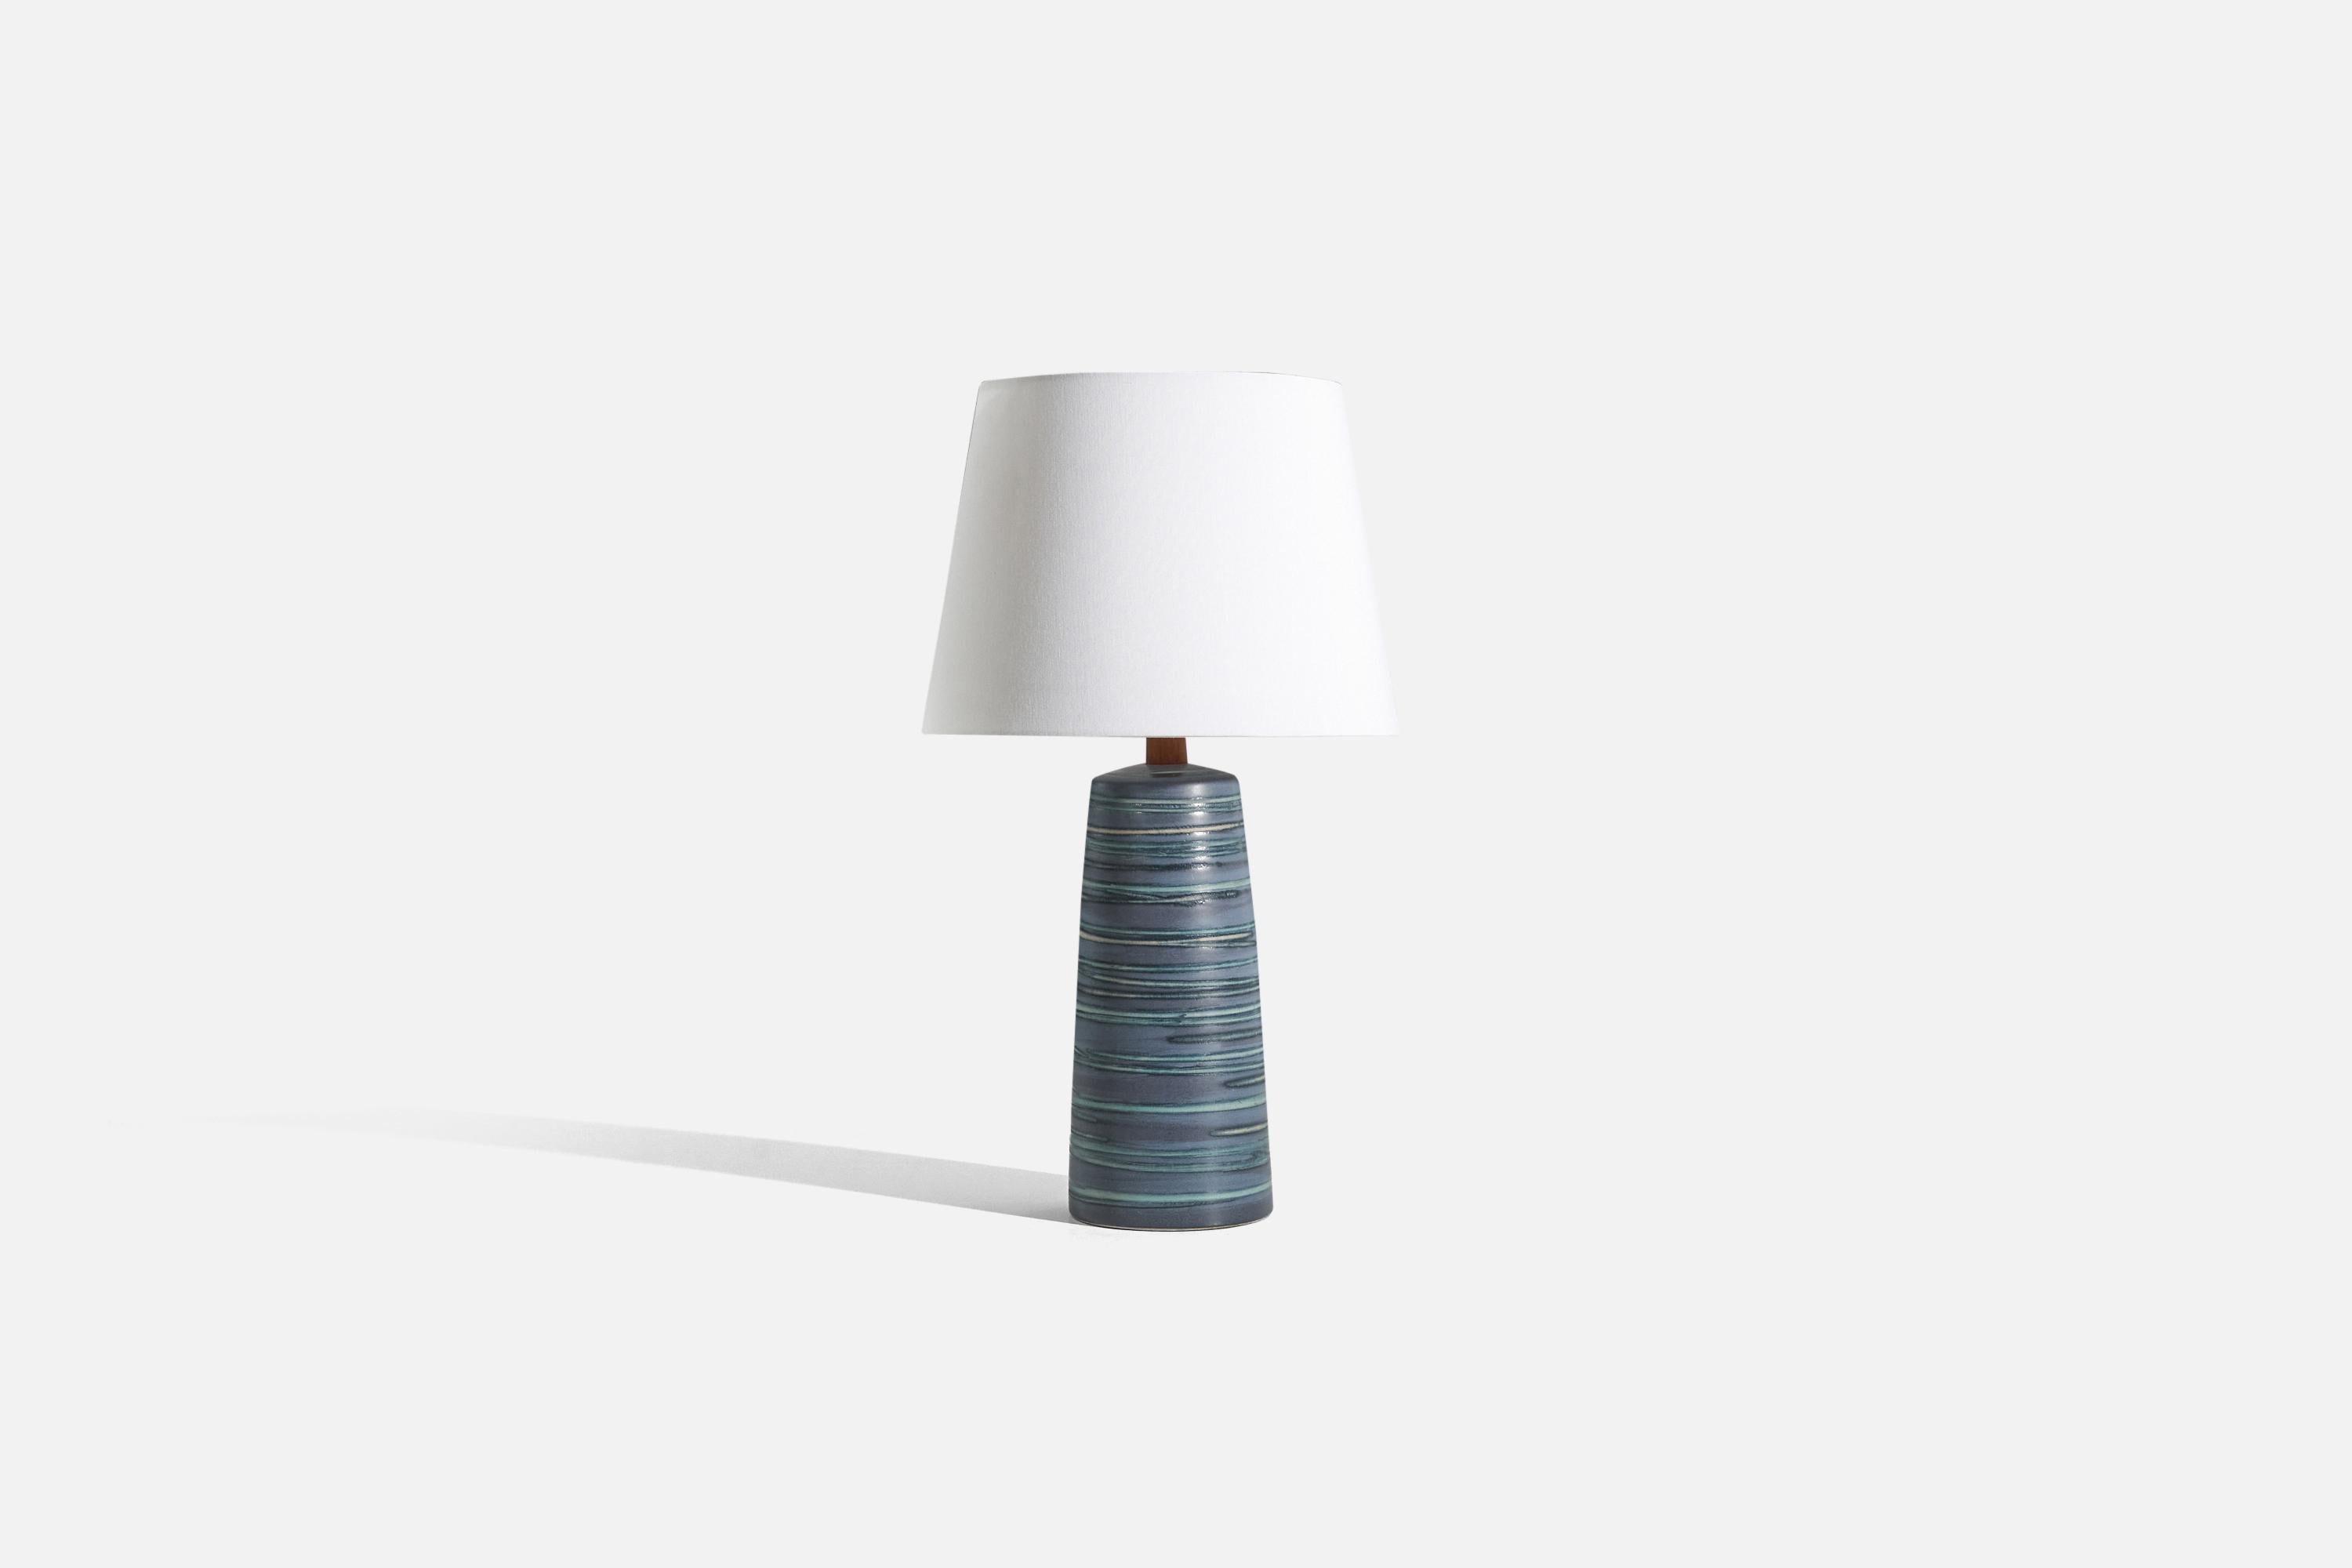 A blue ceramic and walnut table lamp, designed by Jane & Gordon Martz and produced by Marshall Studios, Indianapolis, United States, 1960s.

Sold without lampshade. 
Dimensions of Lamp (inches) : 16.75 x 5.25 x 5.25 (H x W x D)
Dimensions of